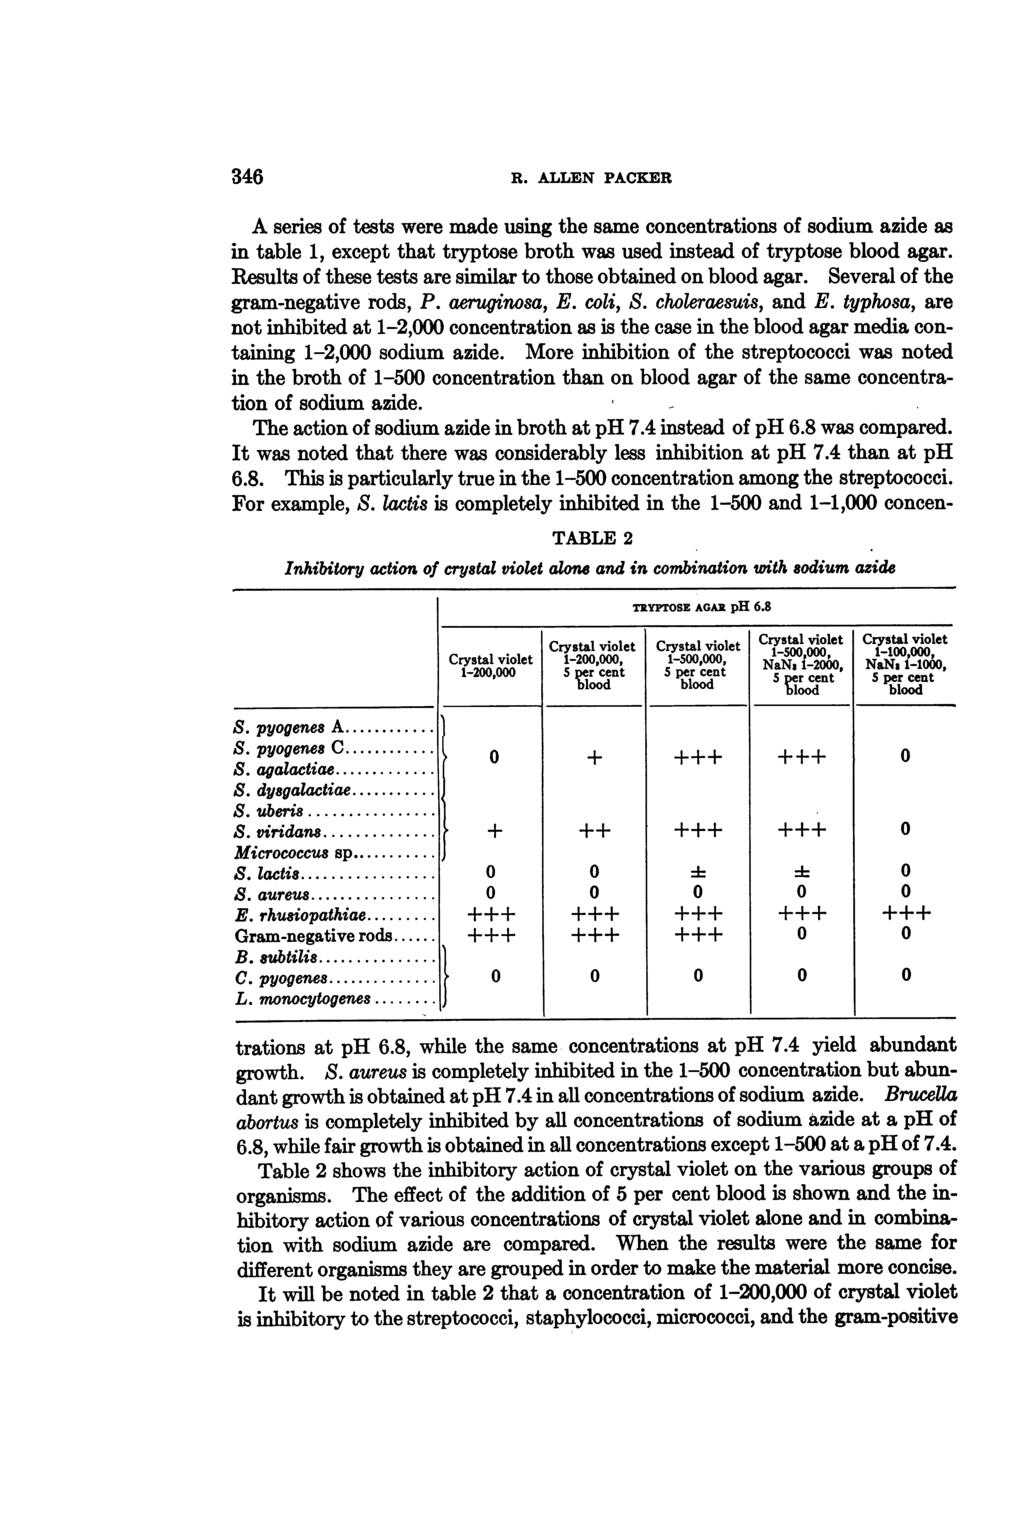 346 A series of tests were made using the same concentrations of sodium azide as in table 1, except that tryptose broth was used instead of tryptose blood agar.